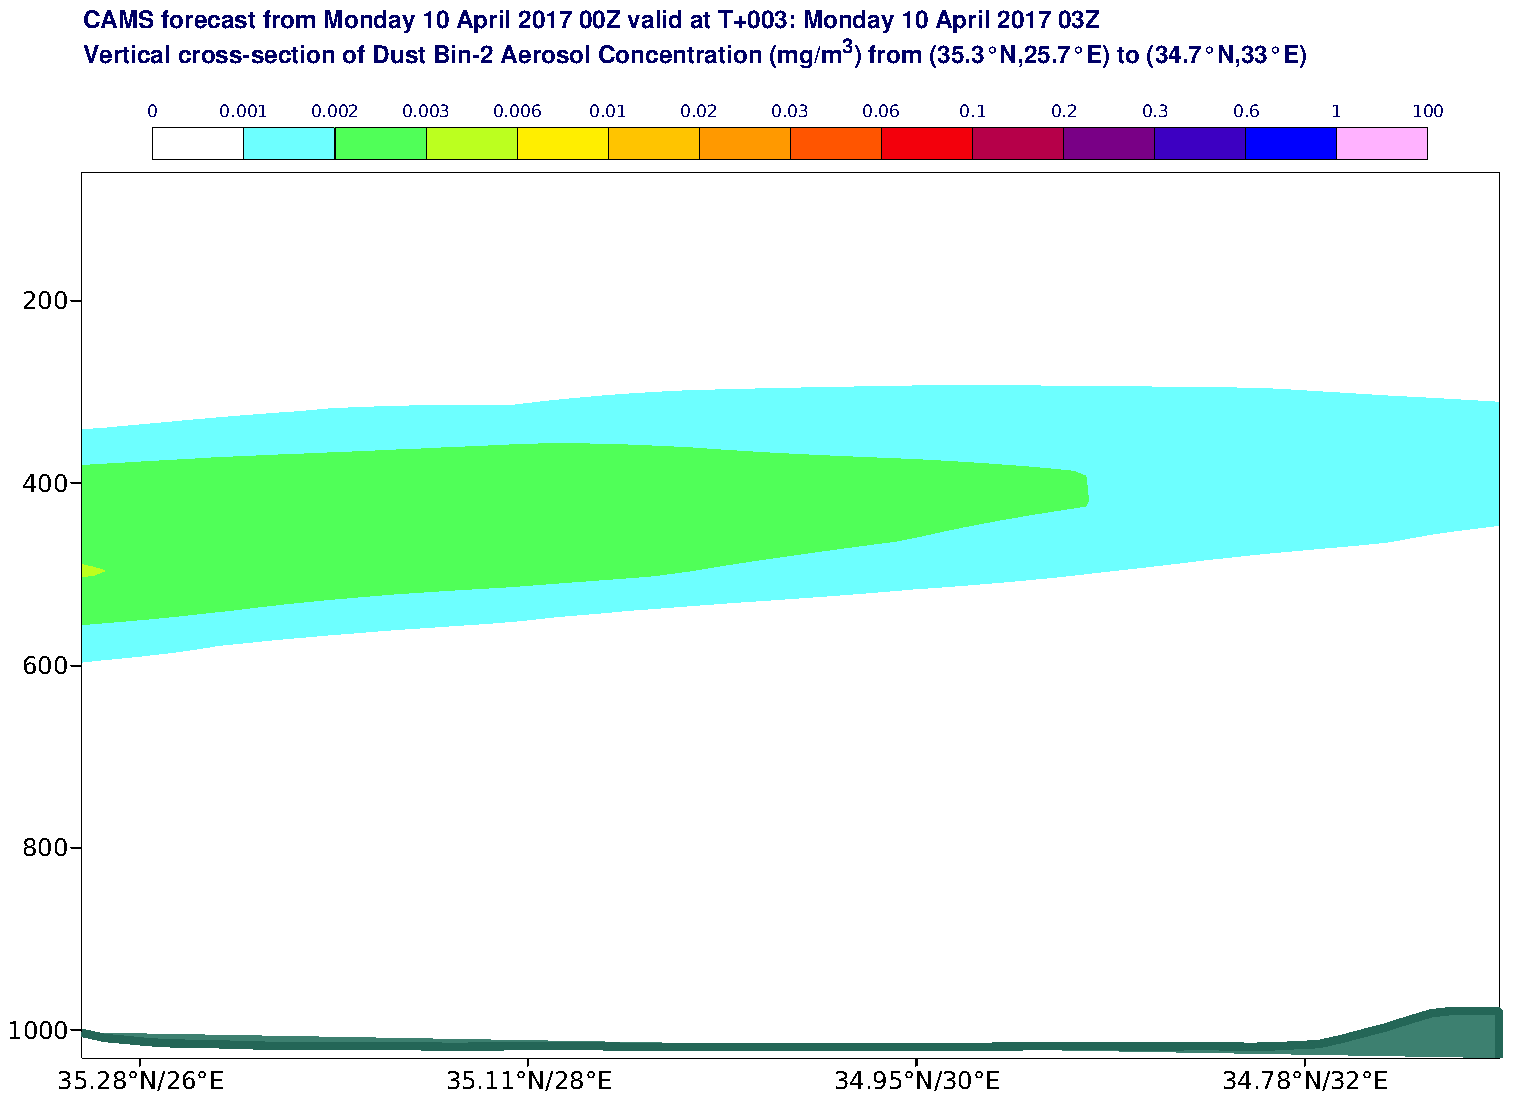 Vertical cross-section of Dust Bin-2 Aerosol Concentration (mg/m3) valid at T3 - 2017-04-10 03:00